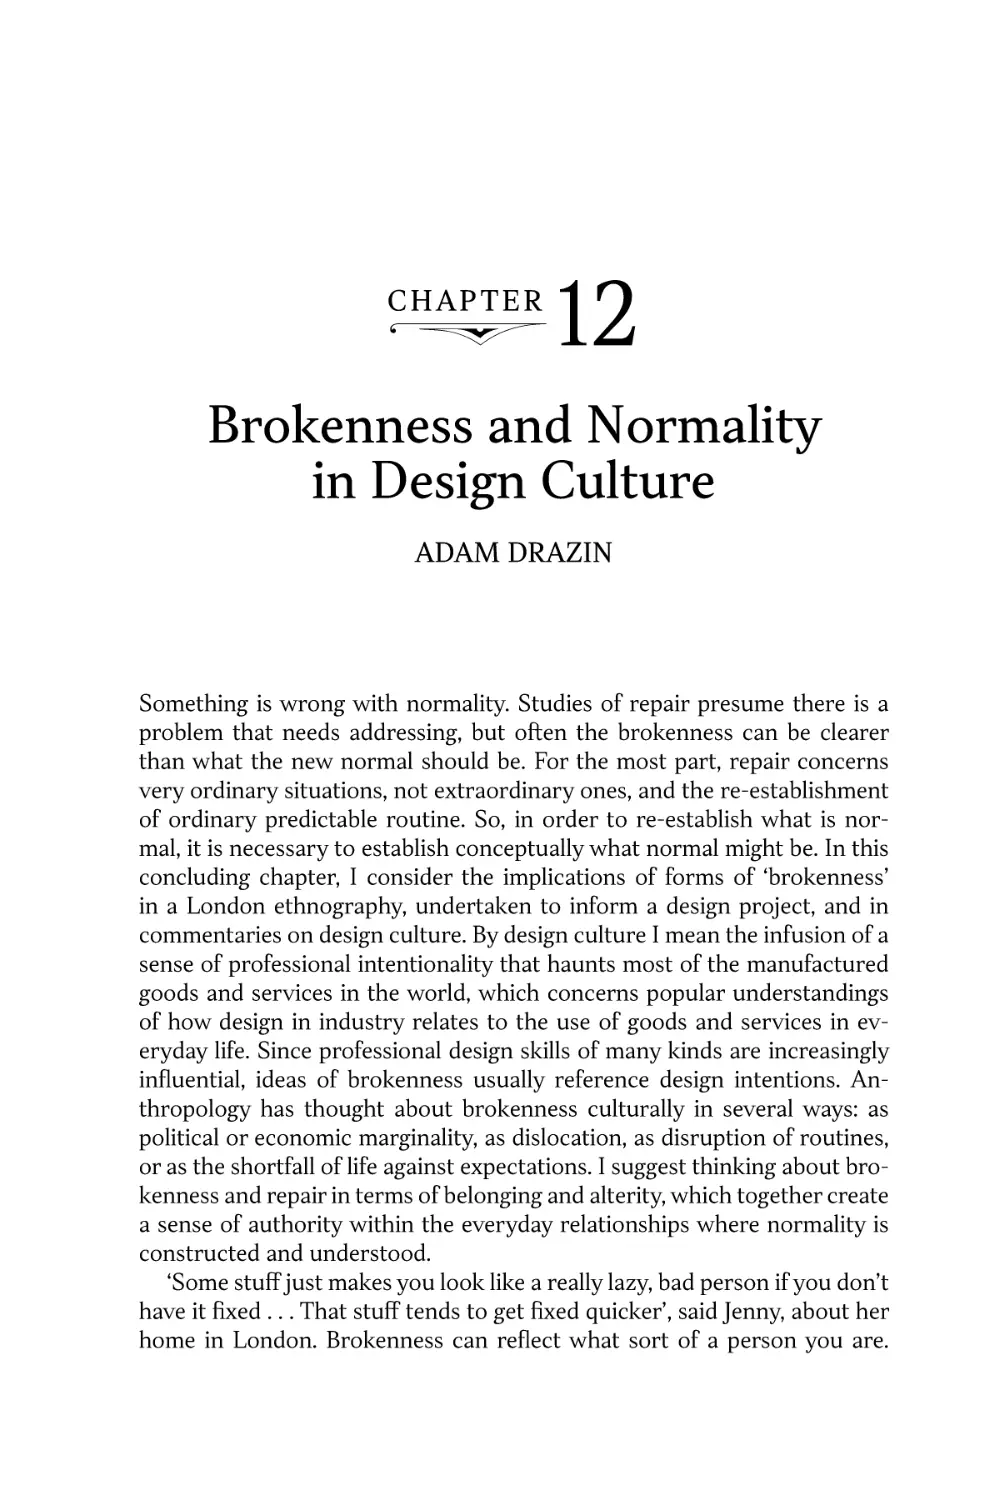 Chapter 12. Brokenness and Normality in Design Culture • Adam Drazin